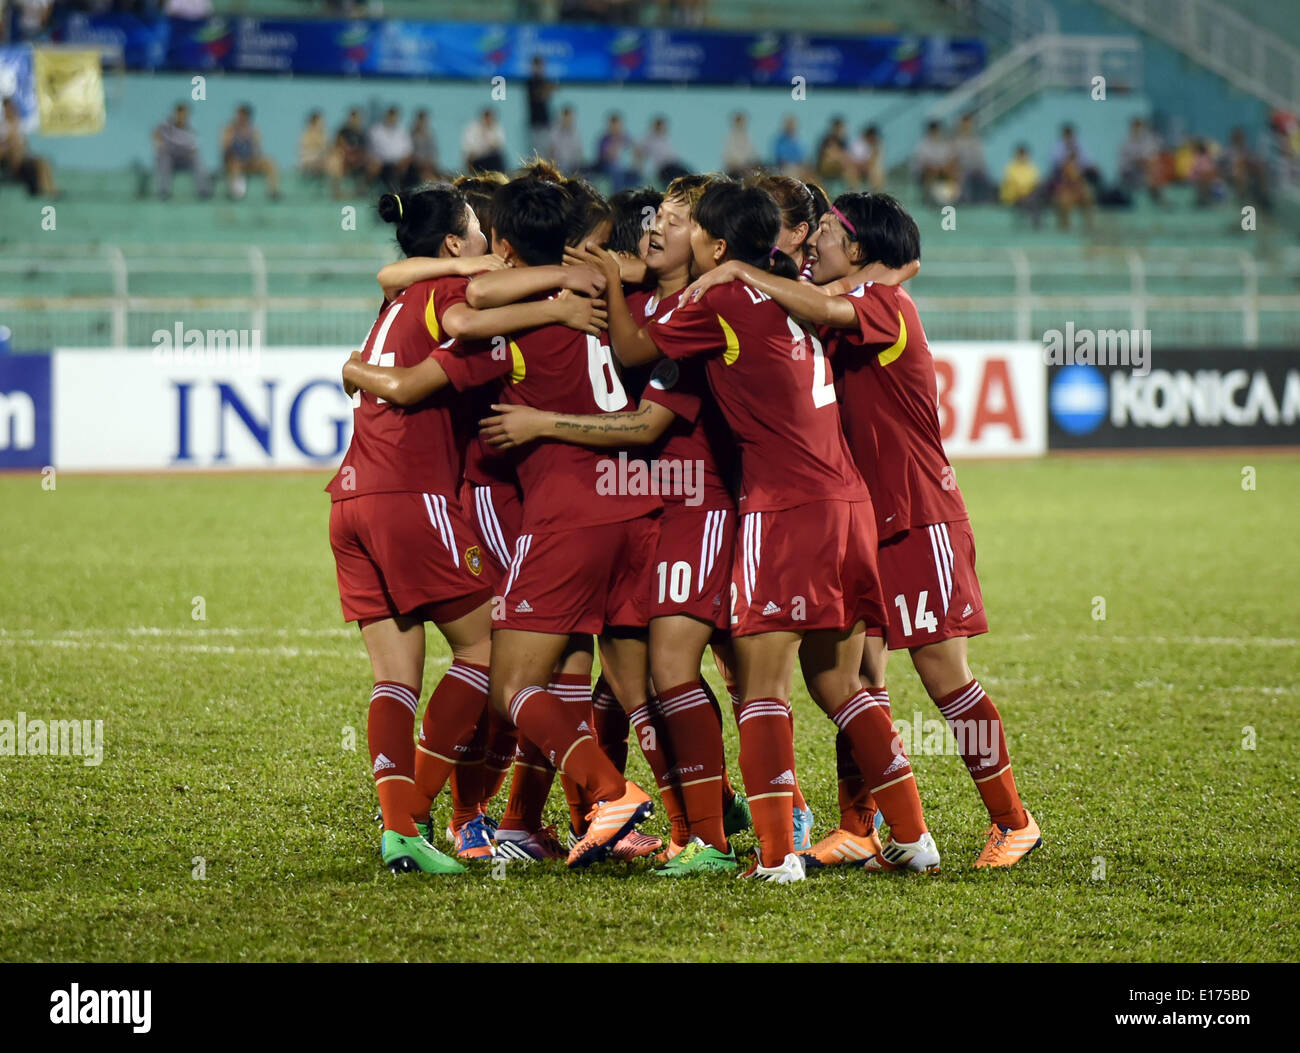 (140525) -- HO CHI MINH CITY, May 25, 2014 (Xinhua) -- China celebrate a goal during the third-place match against South Korea at the 2014 Asian Football Confederation (AFC) Women's Asian Cup at Thong Nhat Stadium in Ho Chi Minh City, Vietnam, May 25, 2014. China defeat South Korea 2-1 to win the third place of the event. (Xinhua/Cheong Kam Ka) Stock Photo